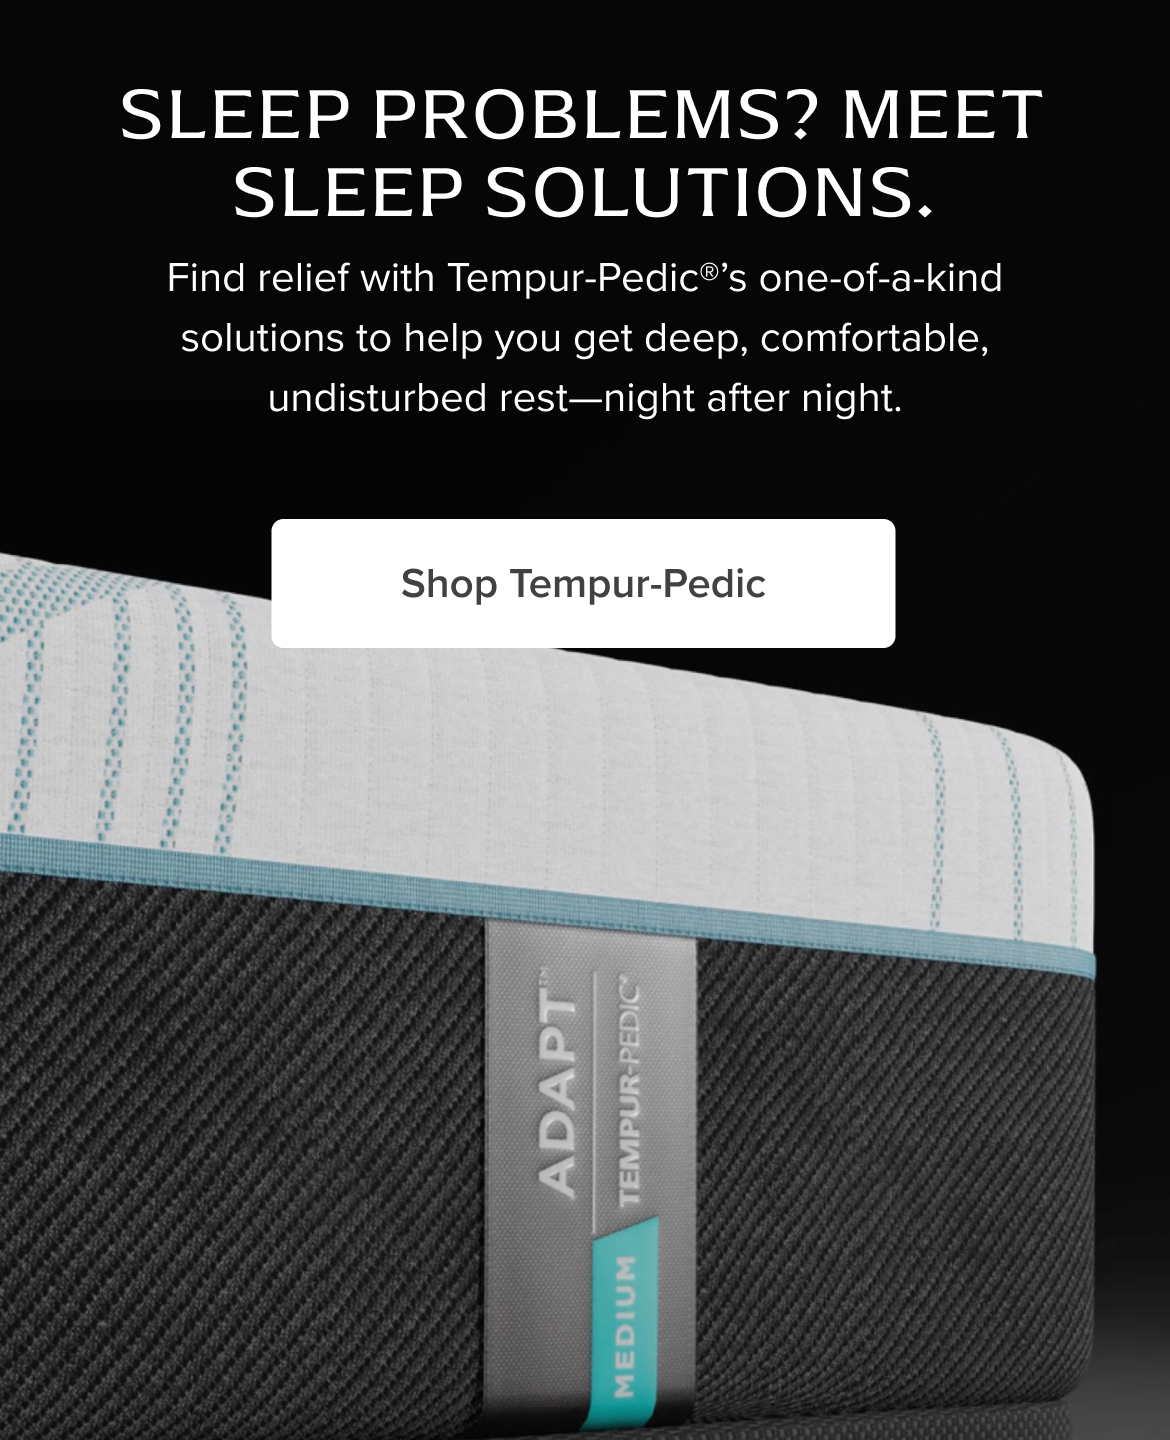 Sleep Problems? Meet Sleep Solutions. Find relief with Tempur-Pedic®’s one-of-a-kind solutions to help you get deep, comfortable, undisturbed rest—night after night. Shop Tempur-Pedic 